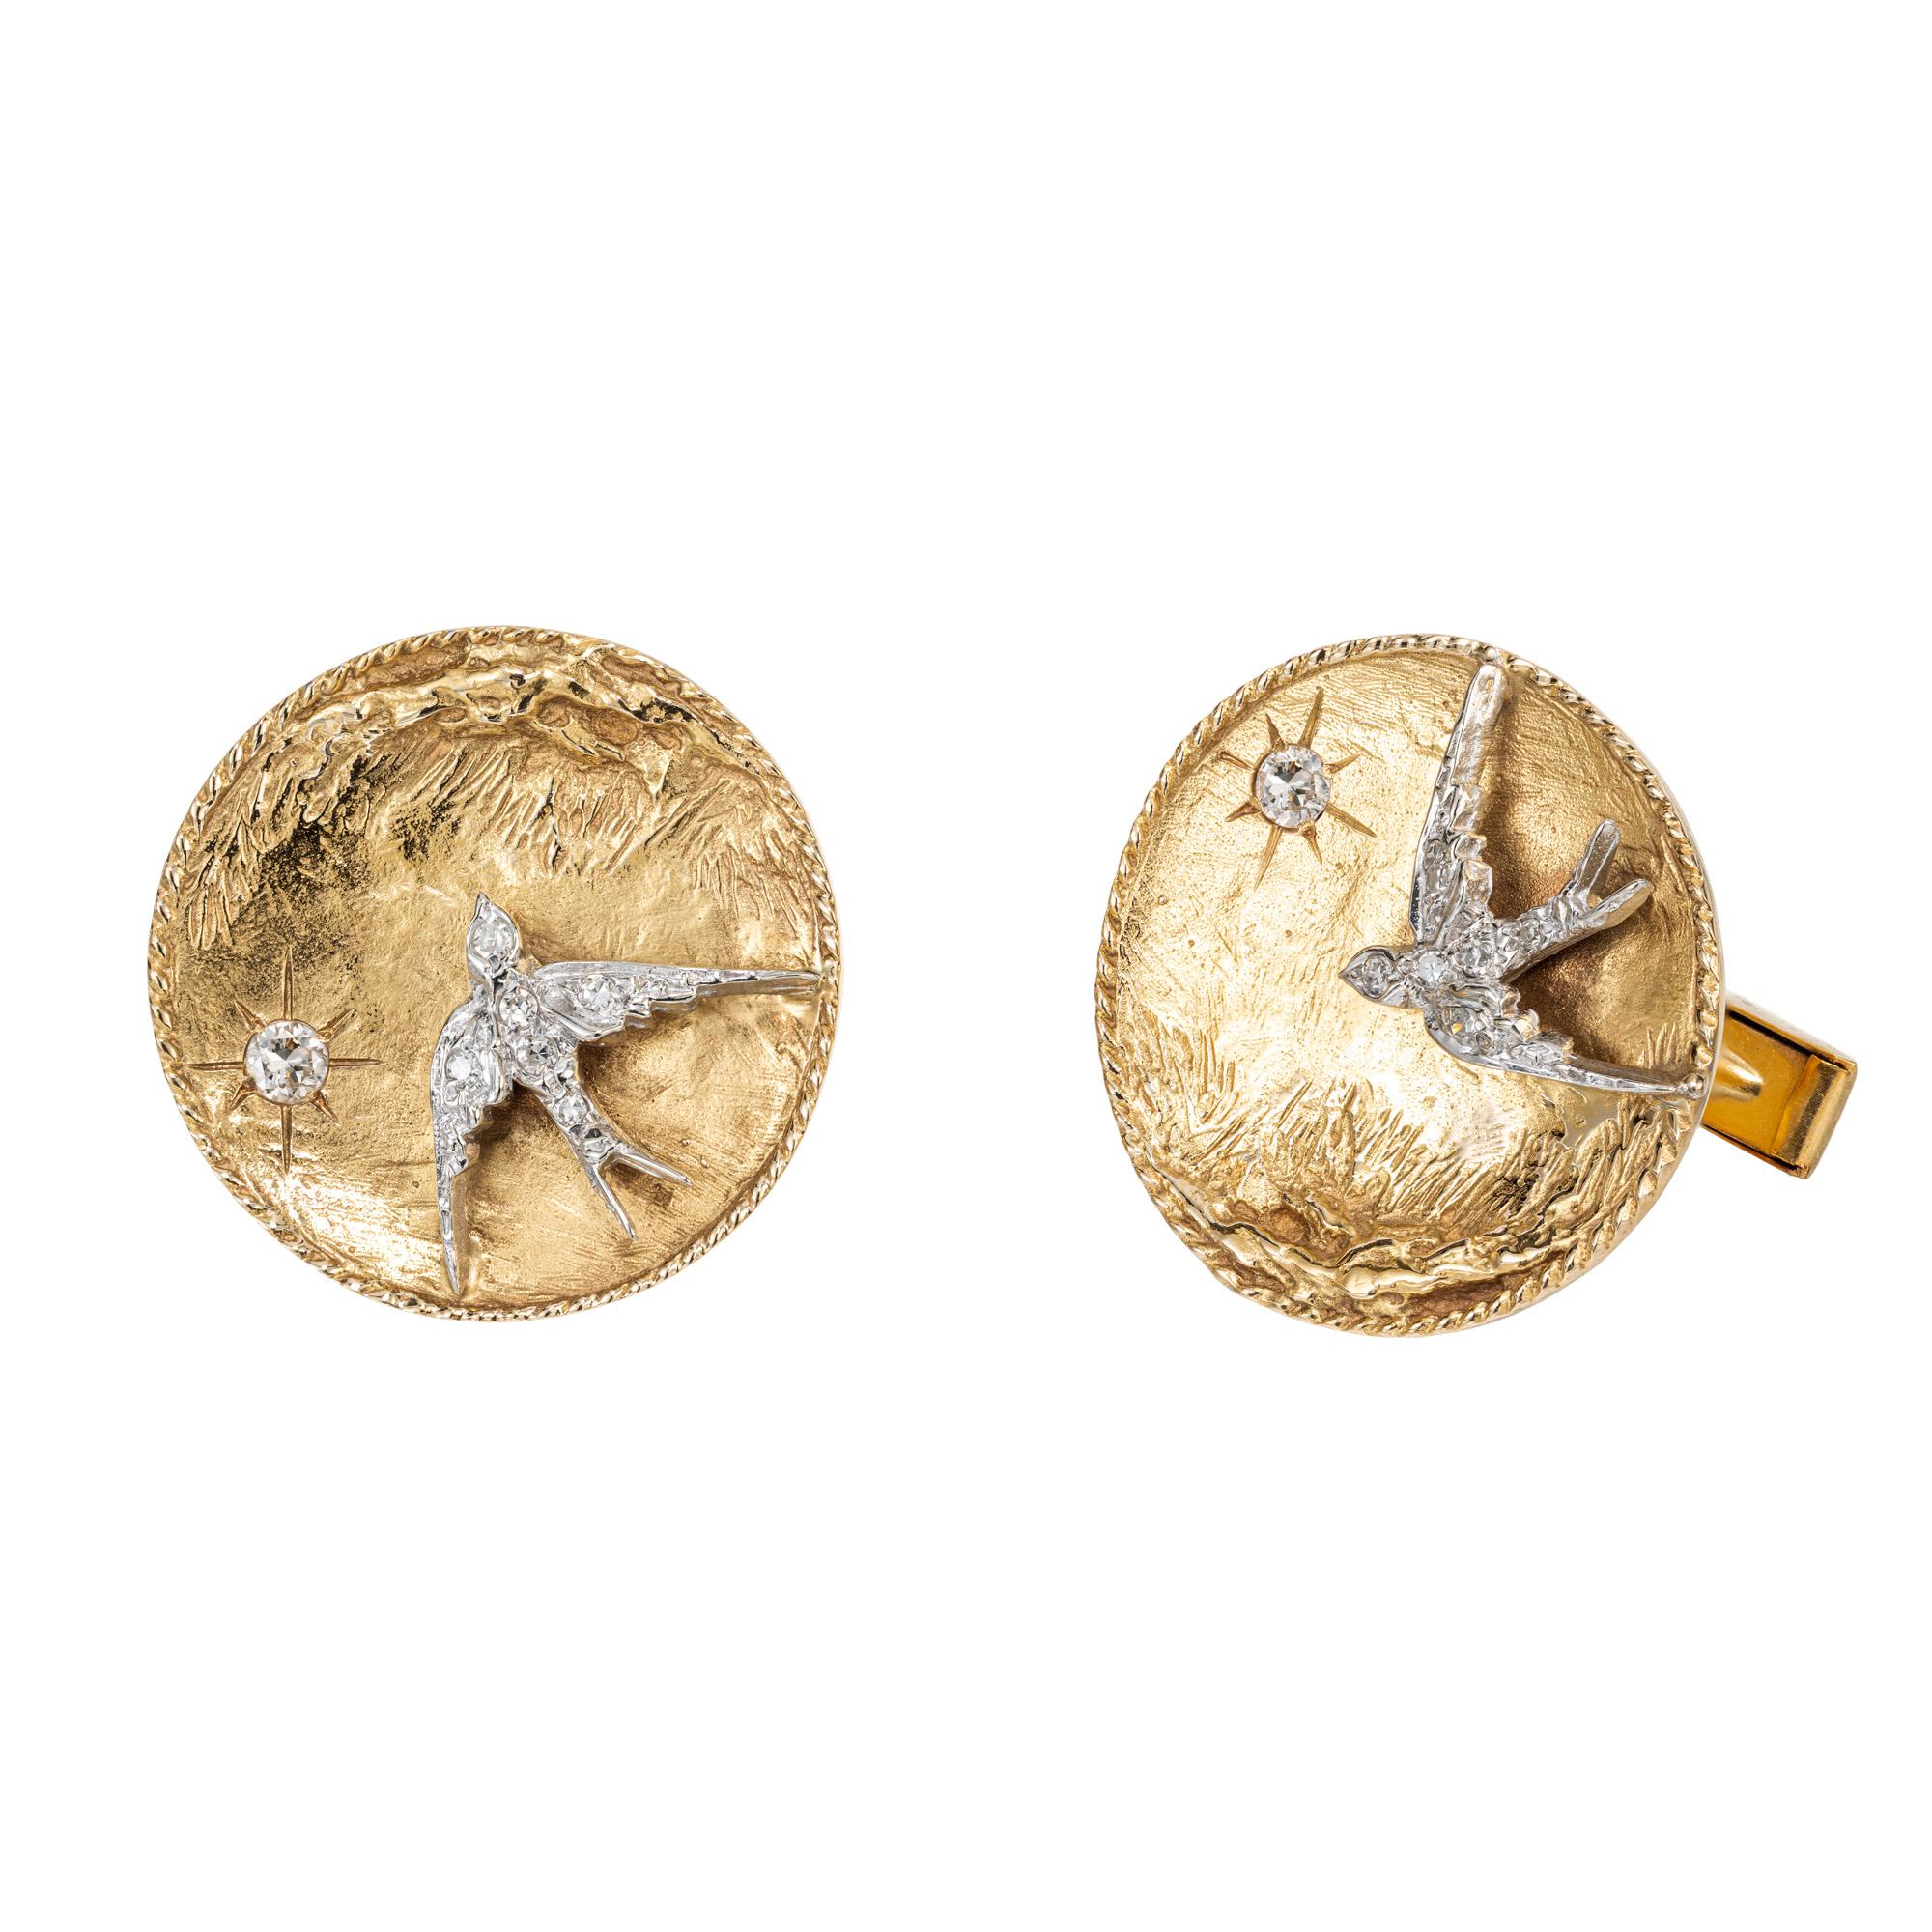 Handmade hand engraved men's diamond cufflinks. These textured, highly detailed 14k yellow gold cufflinks are each adorned with a 14k white gold Swallow bird that consists of 6 round cut diamonds. There is also a single full cut separate diamond on